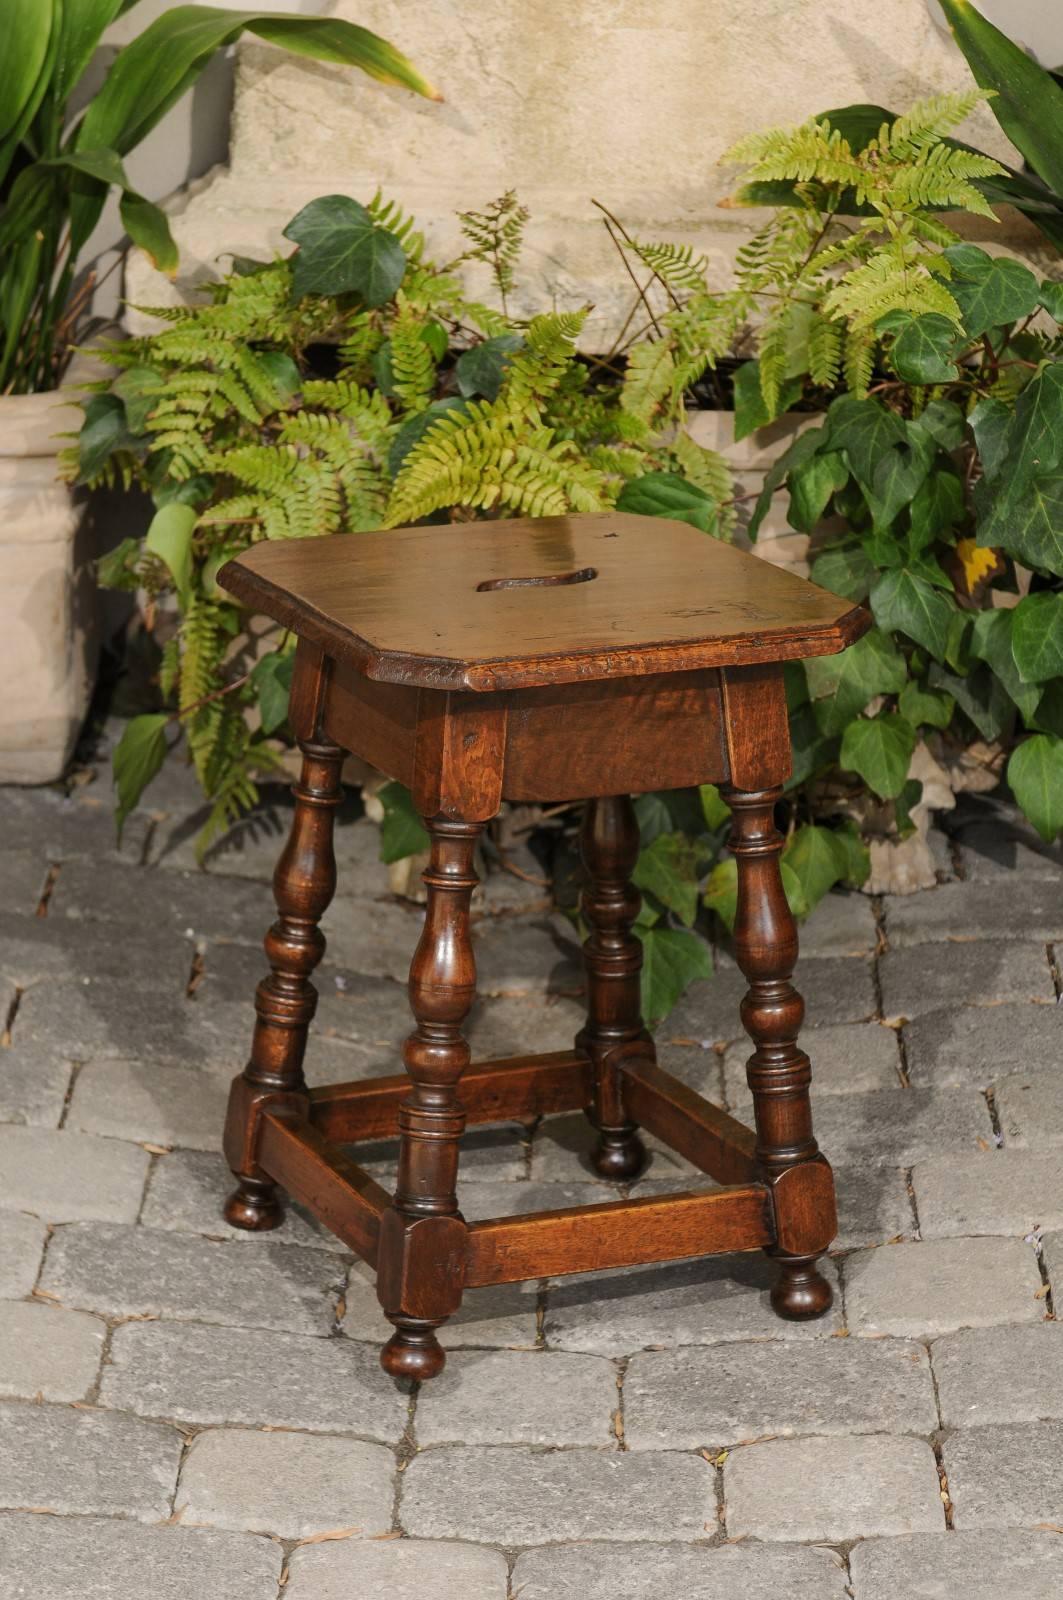 An Italian walnut stool with turned legs and side stretcher from the early 19th century. Born in Italy during the 1820s, this Italian stool features a square wooden seat with canted corners and pierced handle, resting on a simple apron. Four